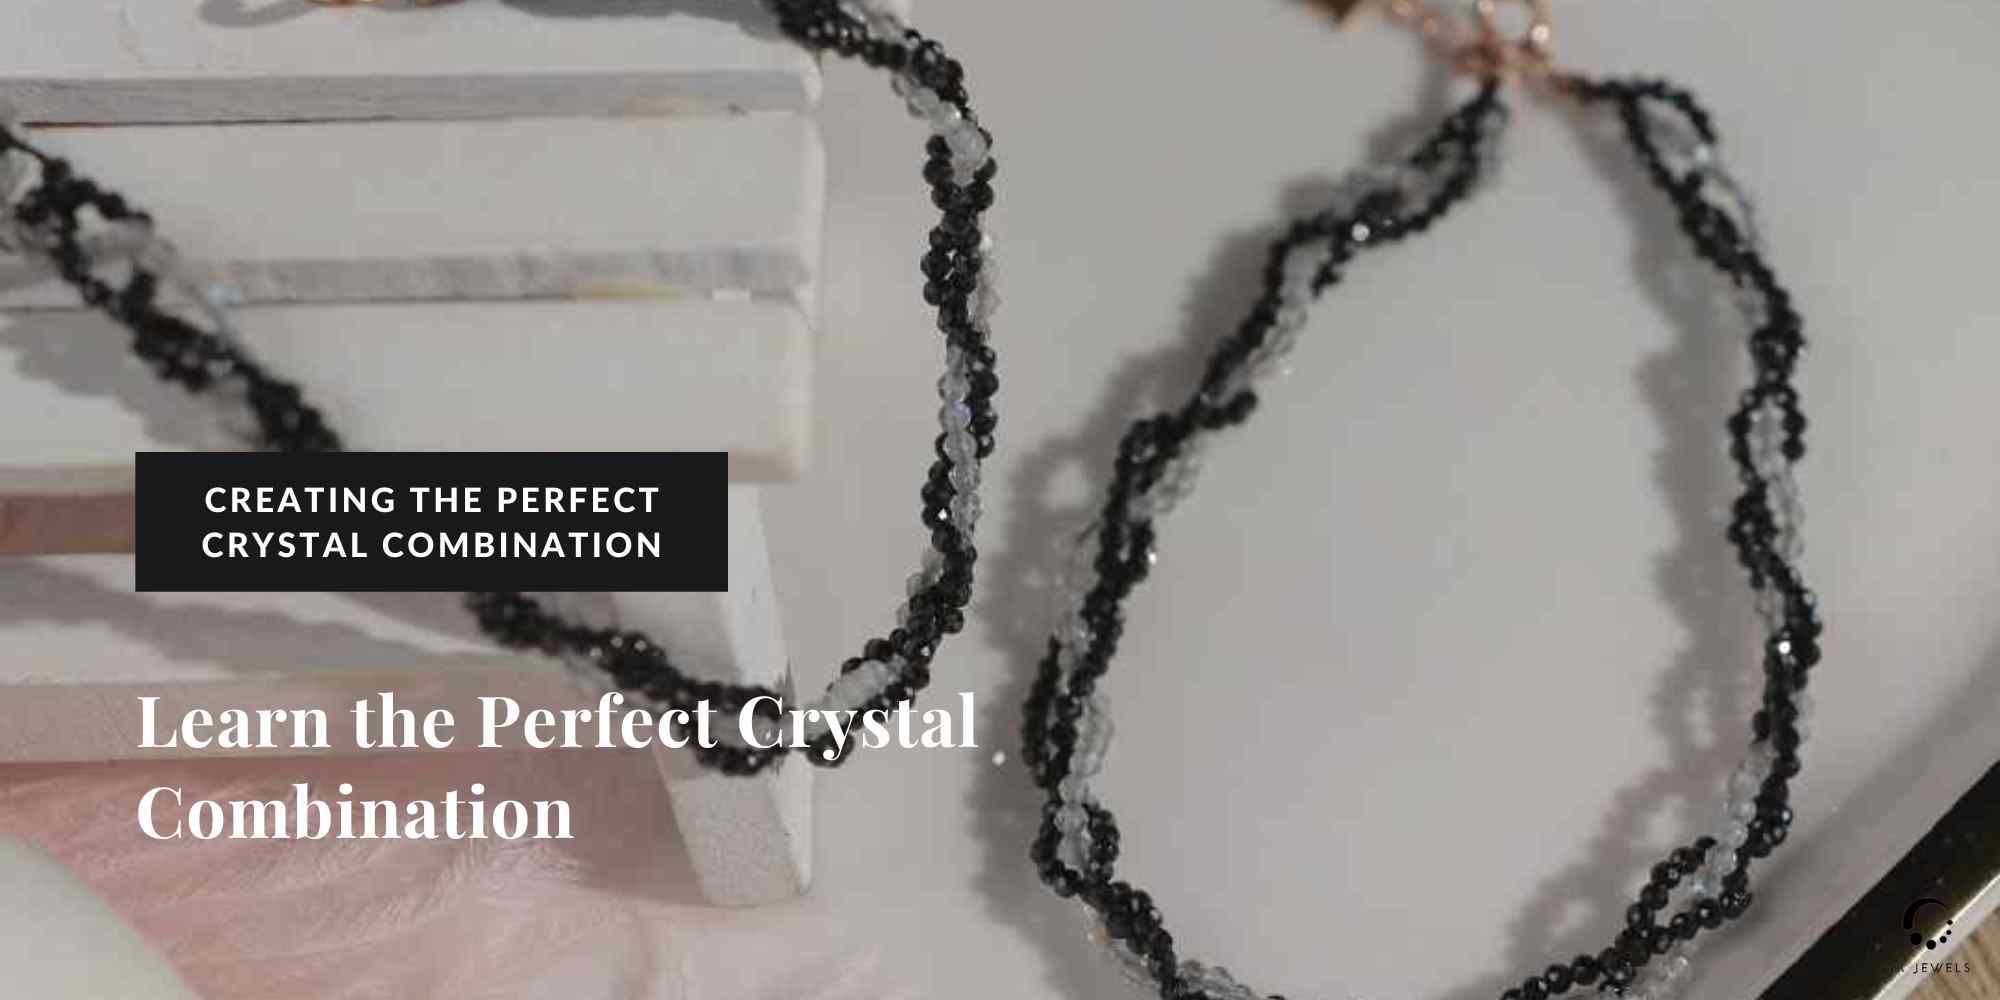 Creating the Perfect Crystal Combination